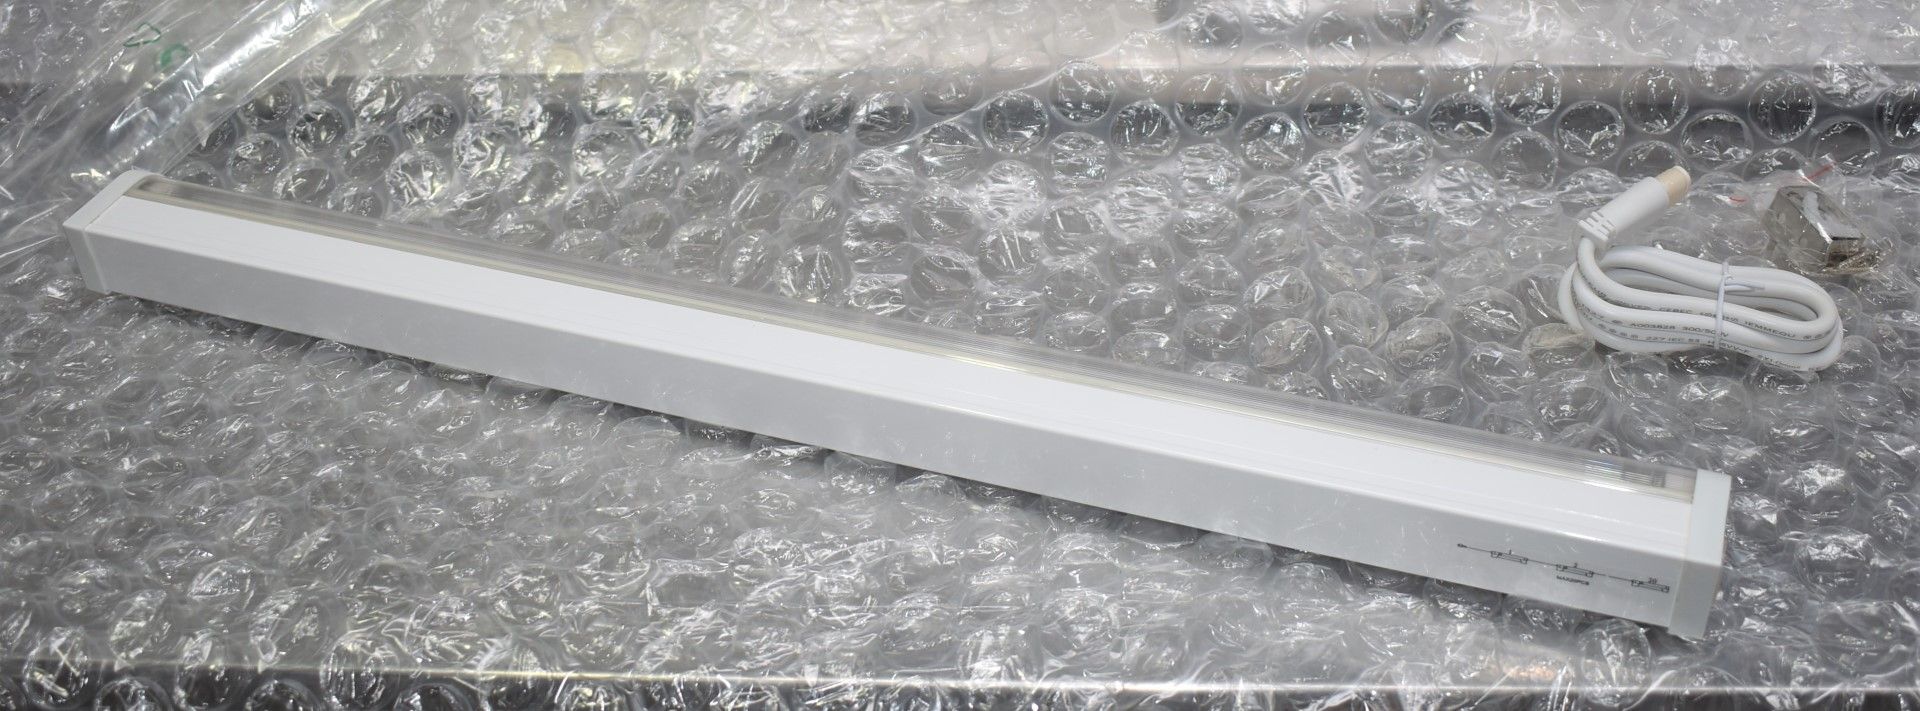 10 x Bathroom Light Fittings - IP44 Waterproof T5 14w Fluorescent Lights With Built-In Electronic - Image 8 of 11